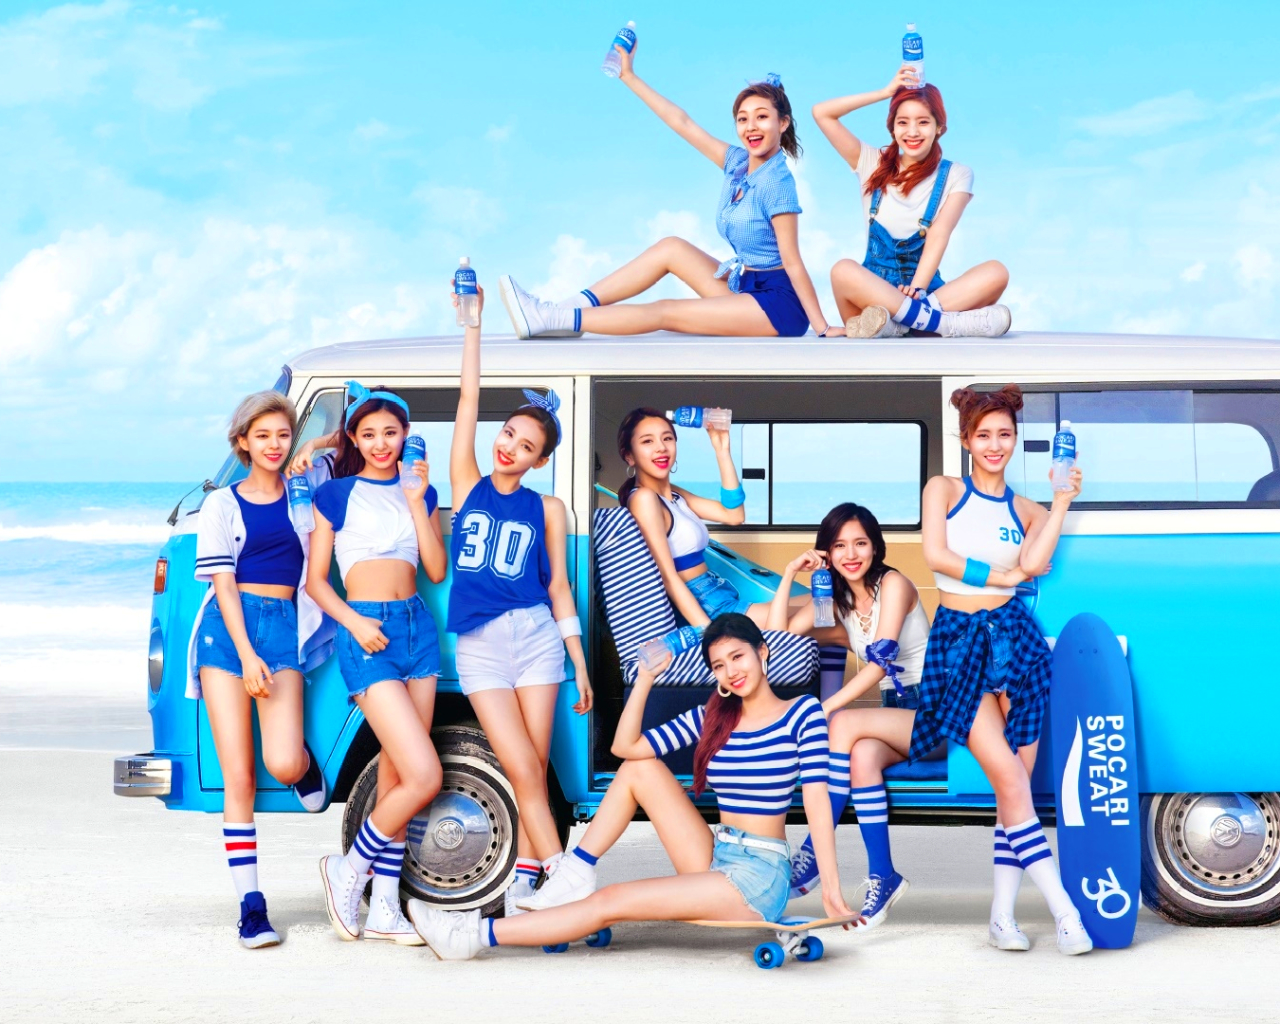 Twice (JYP Ent) image Twice wallpaper HD wallpaper and background